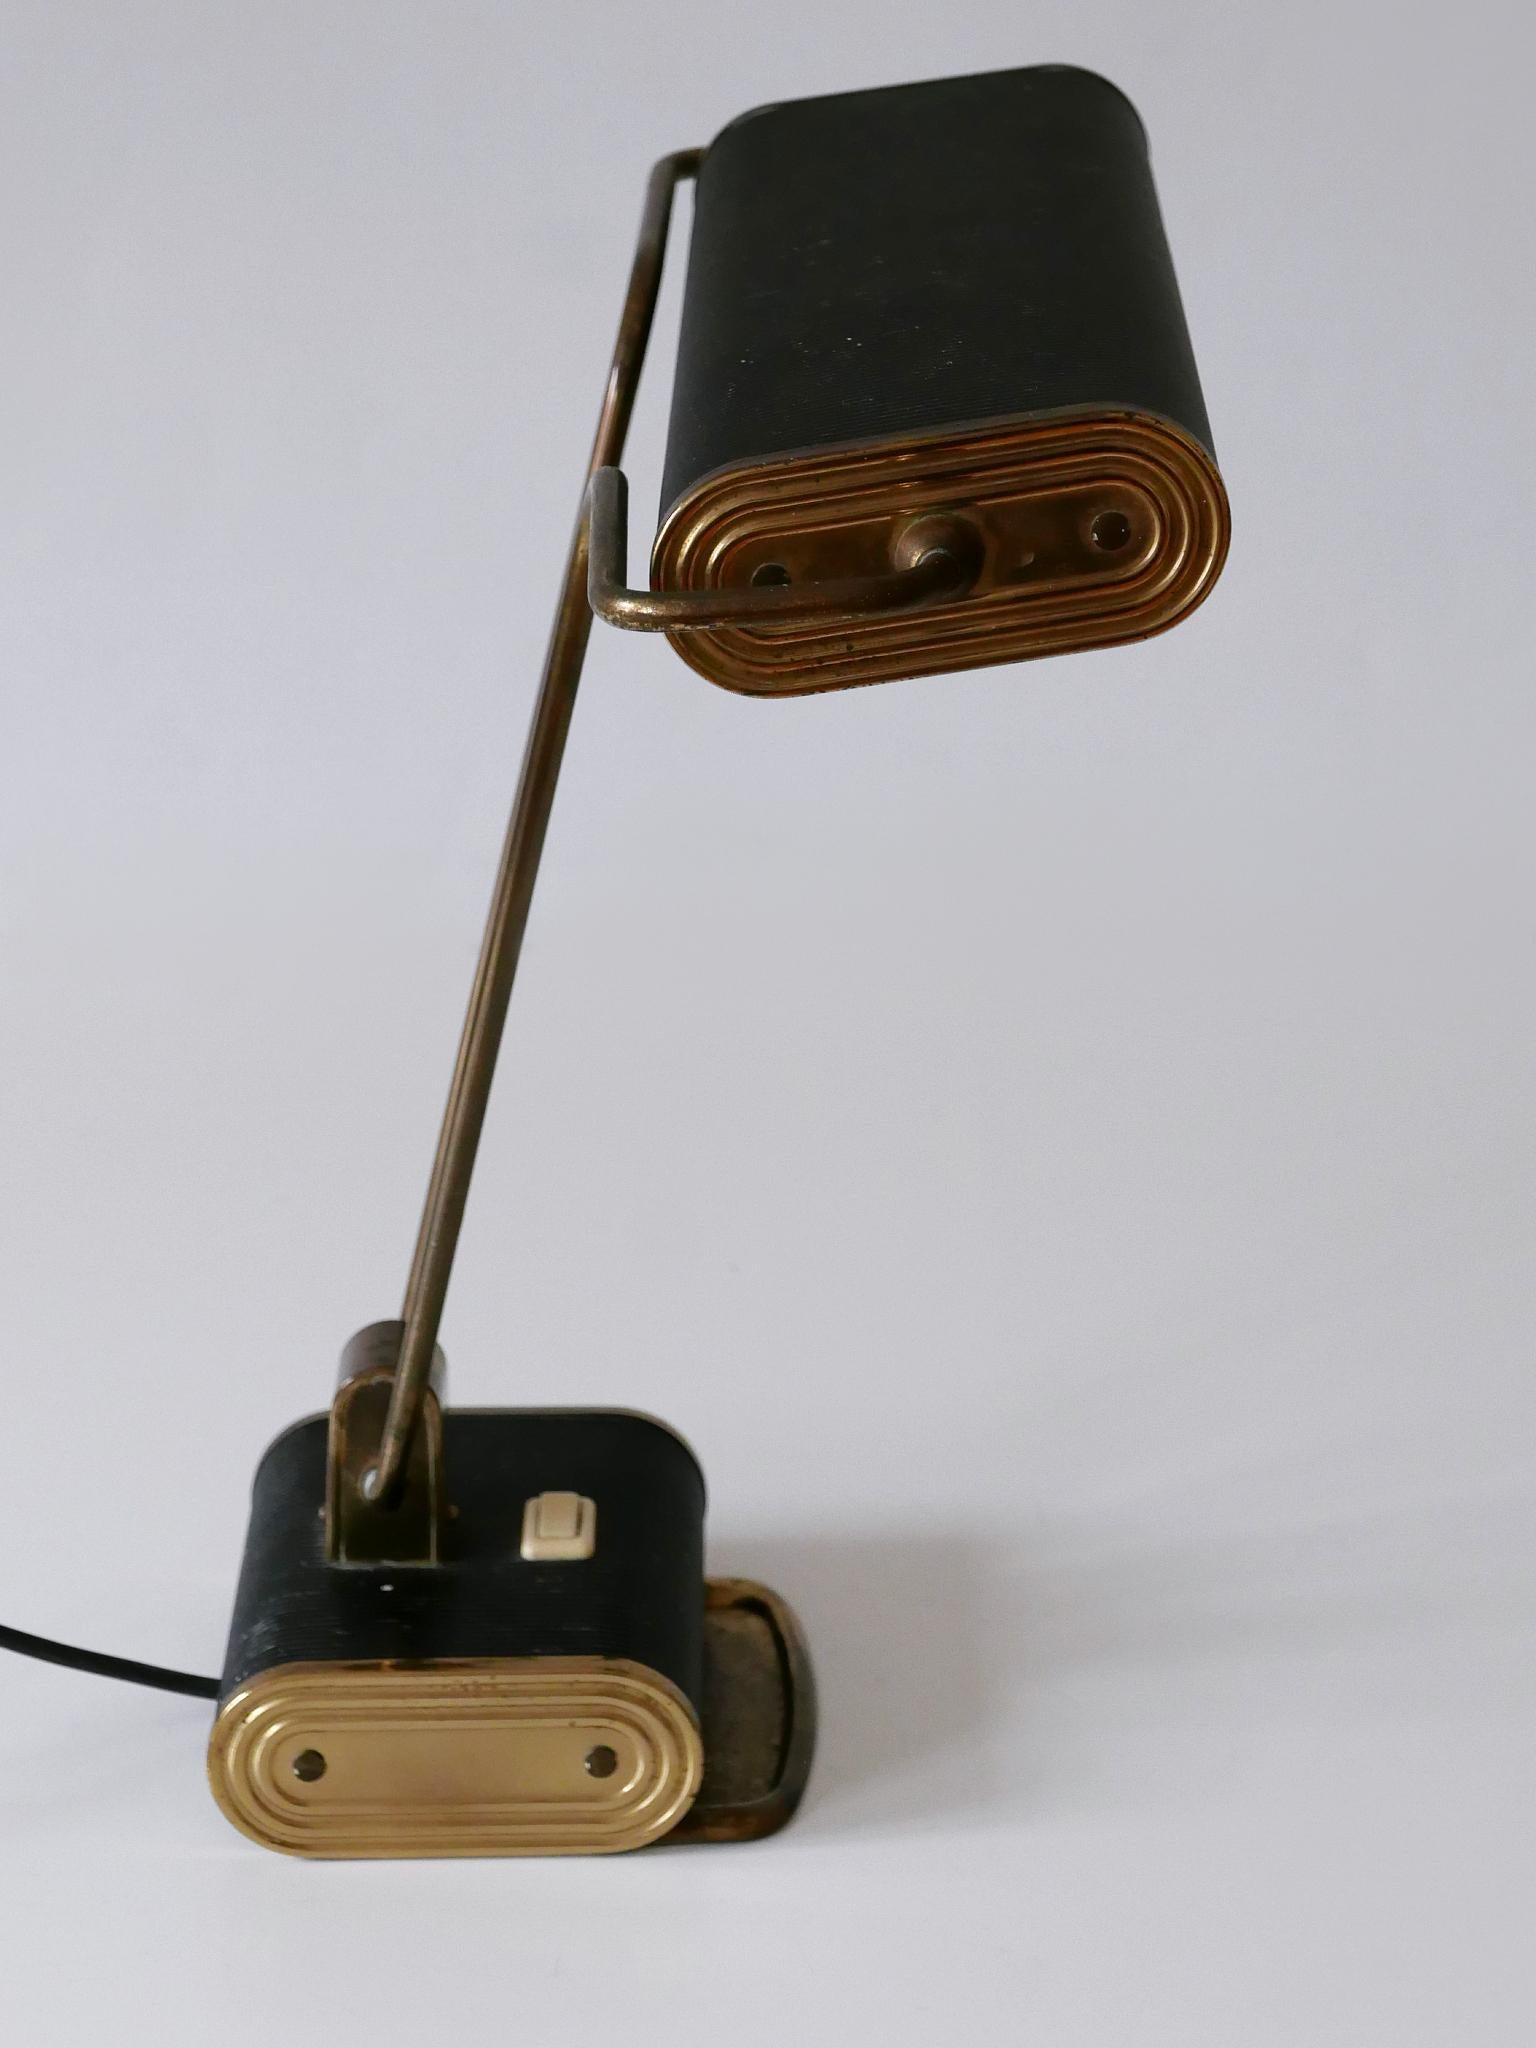 Art Deco Table Lamp or Desk Light 'No 71' by André Mounique for Jumo 1930s For Sale 4